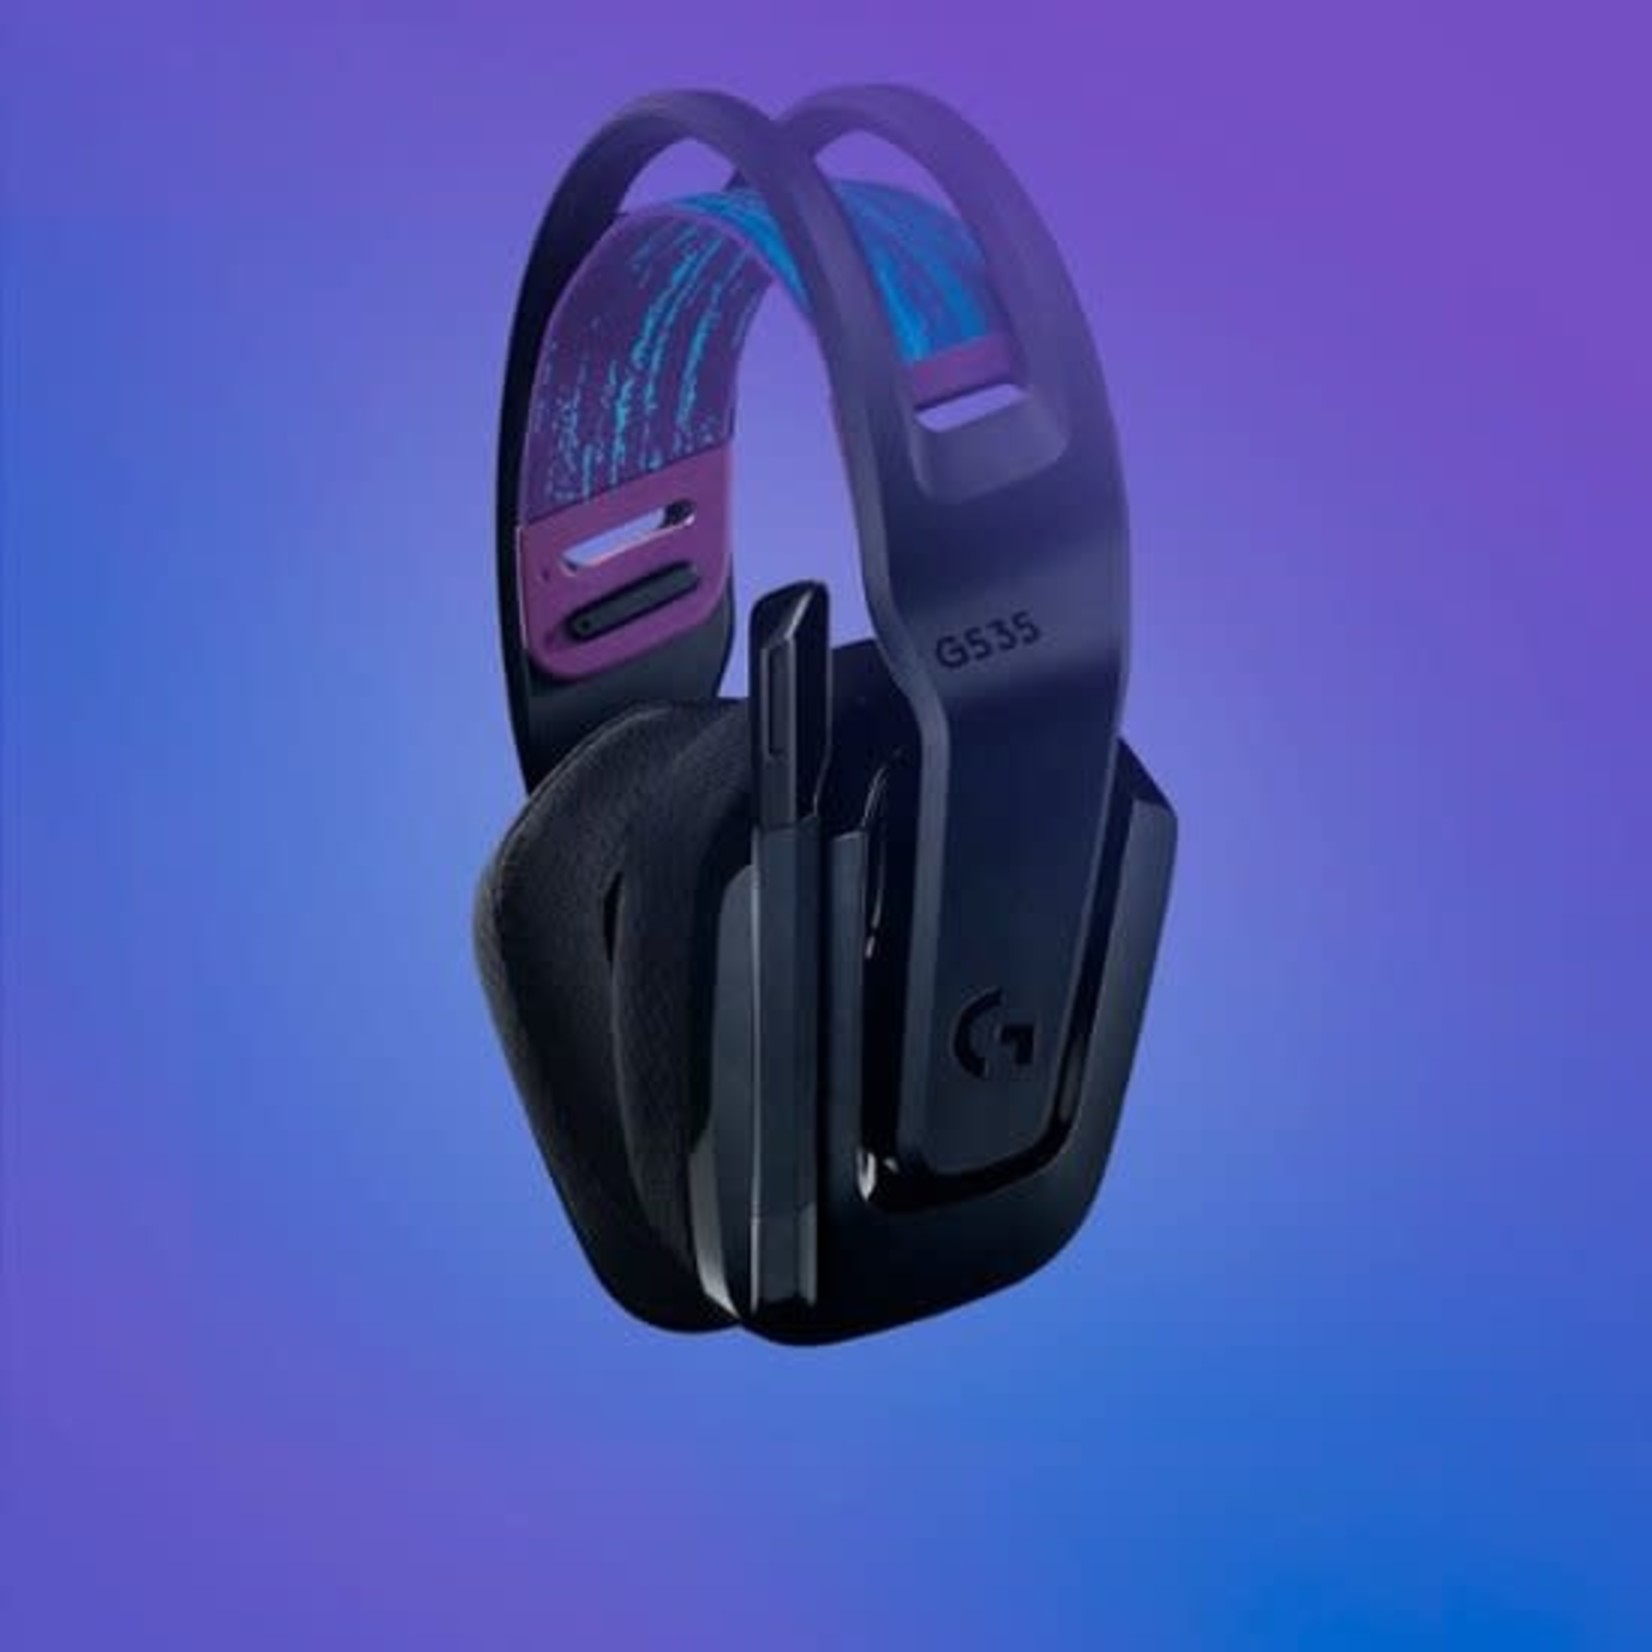 Logitech G535 Lightspeed Wireless Dolby Atmos Over-the-Ear Gaming Headset